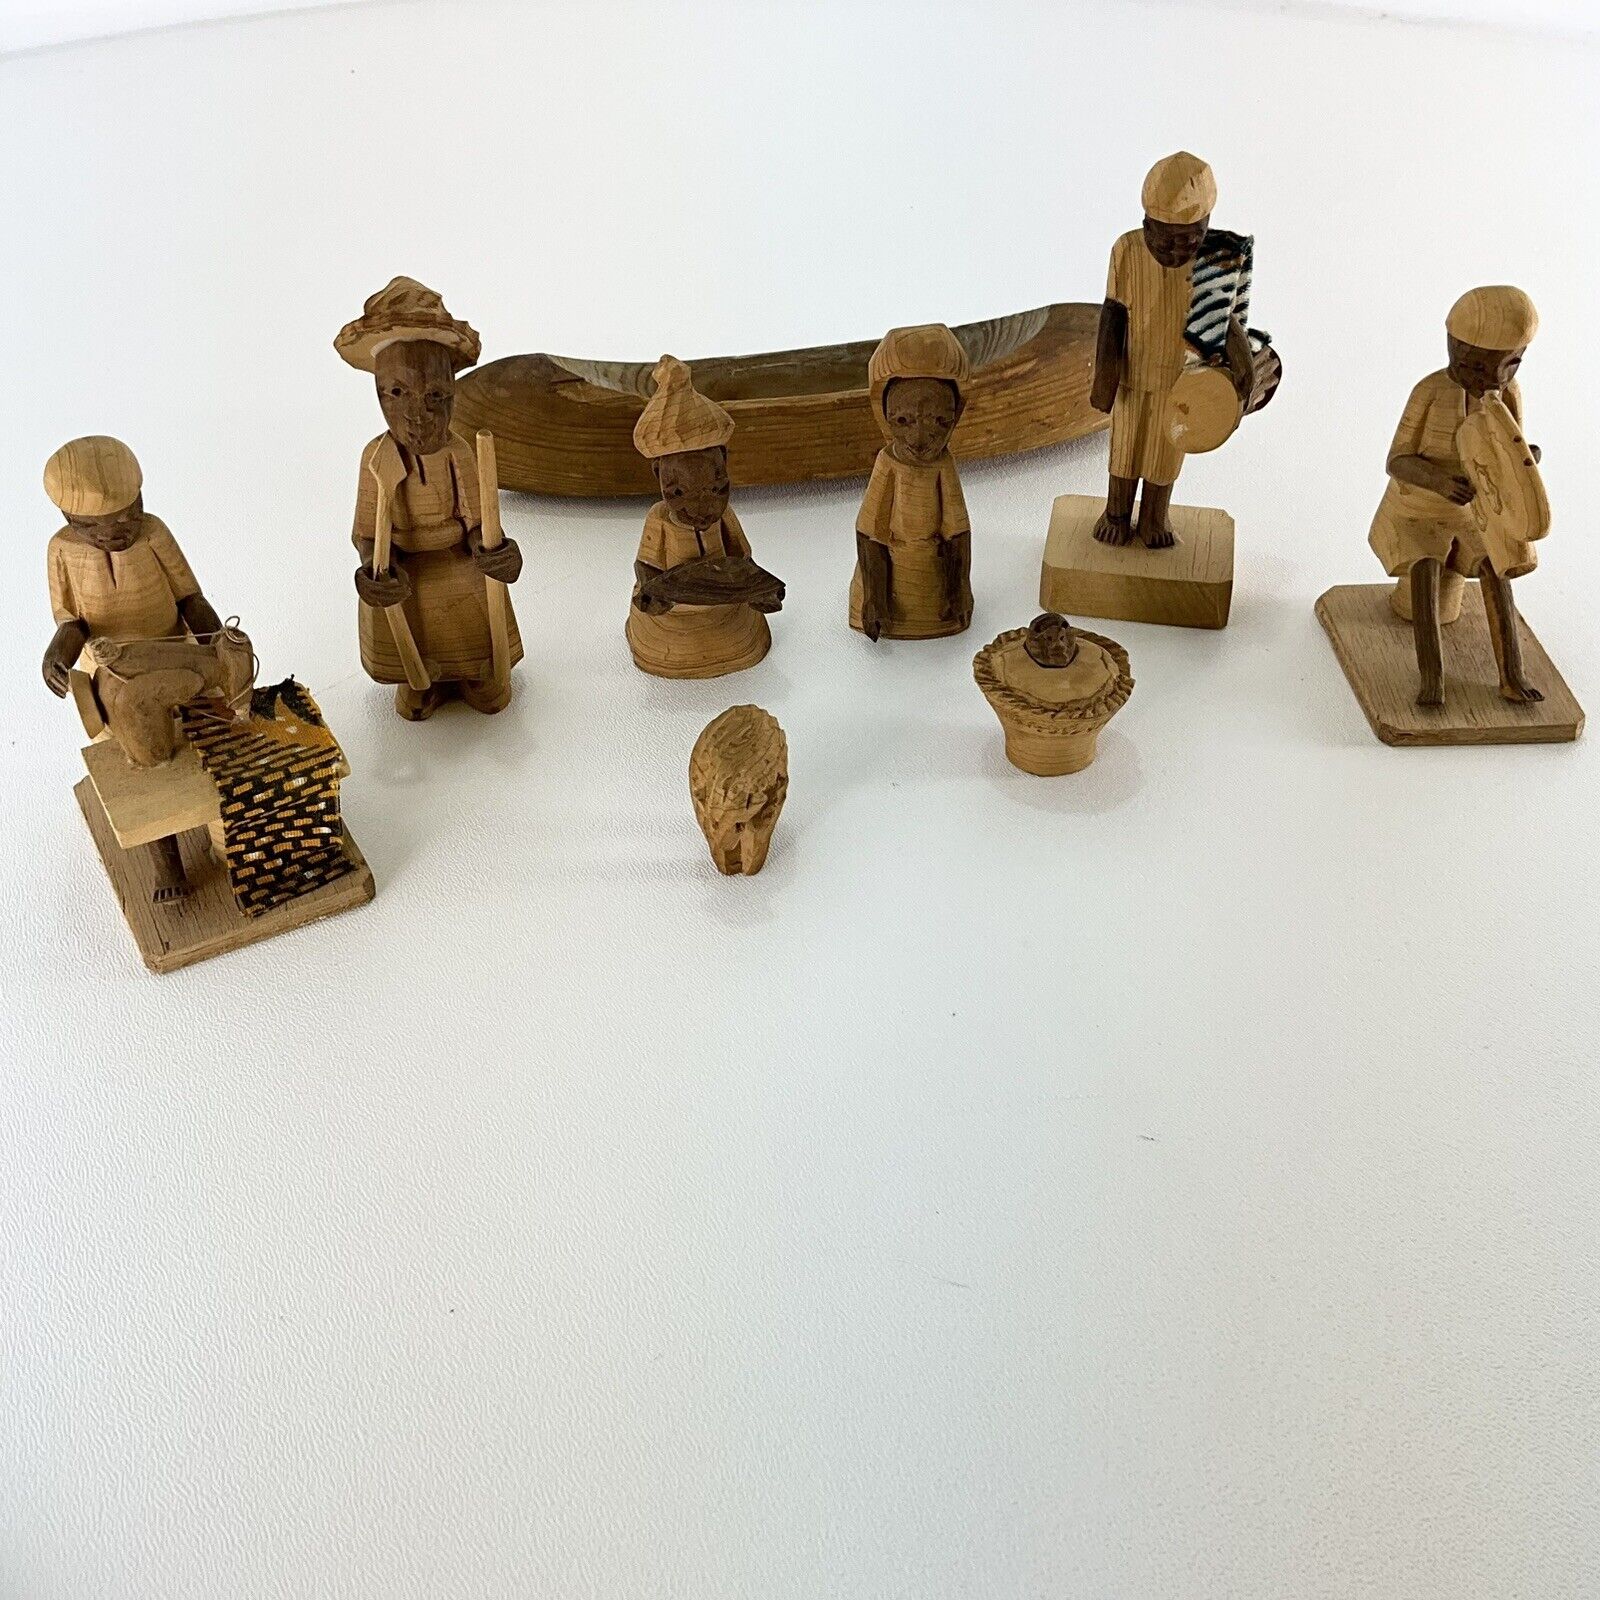 Lot of 9 Vintage Nigerian Thorn Wood Carving Folk Art Figurines Collectibles